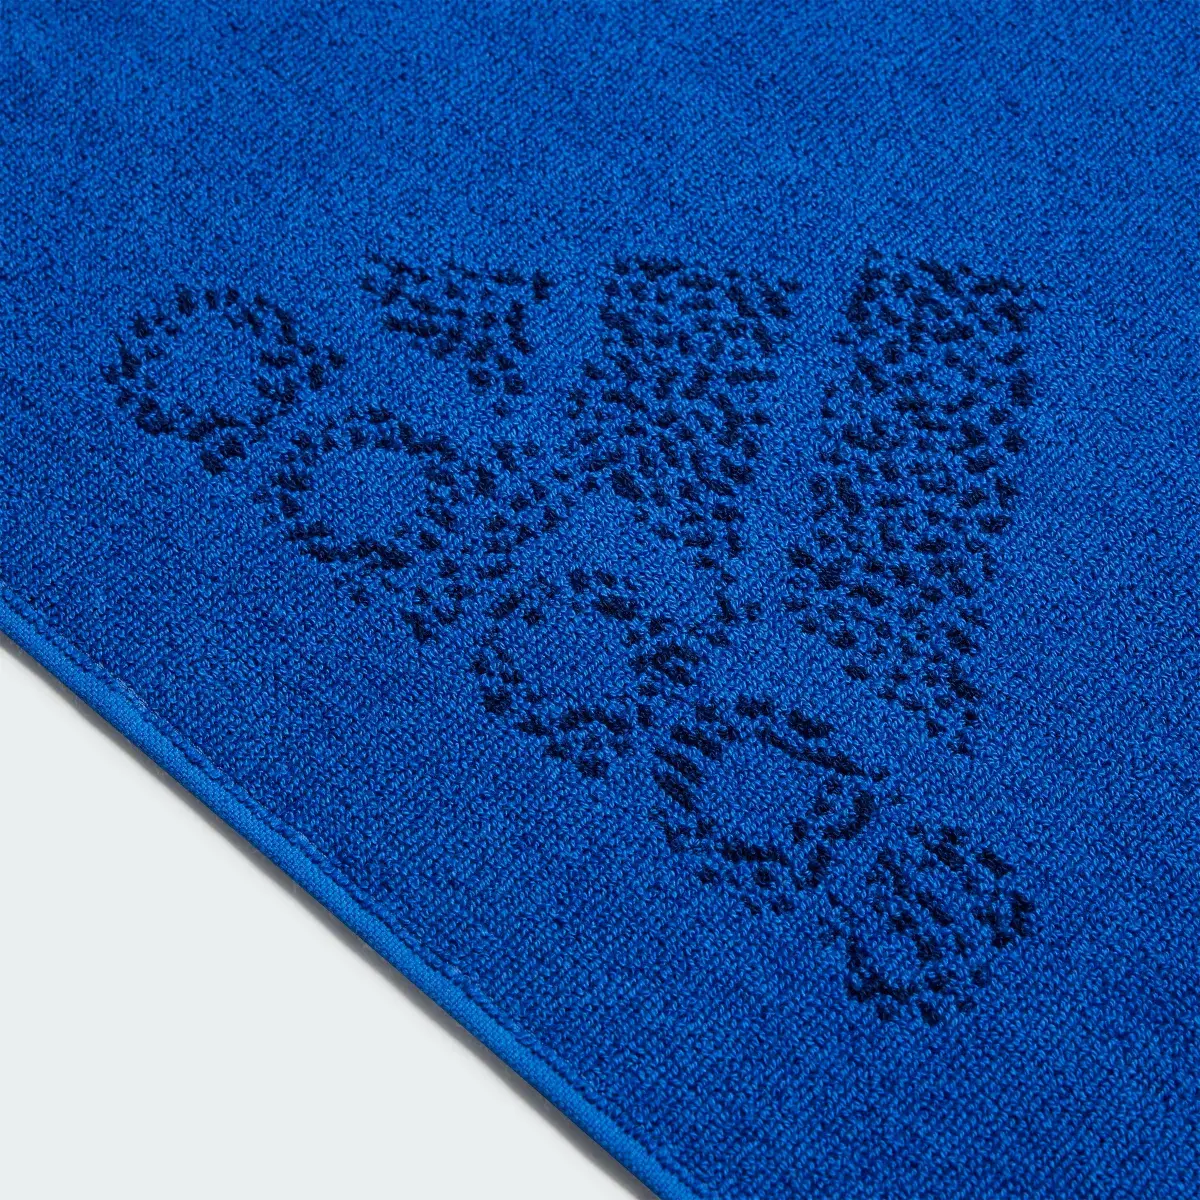 Adidas Branded Must-Have Towel. 3